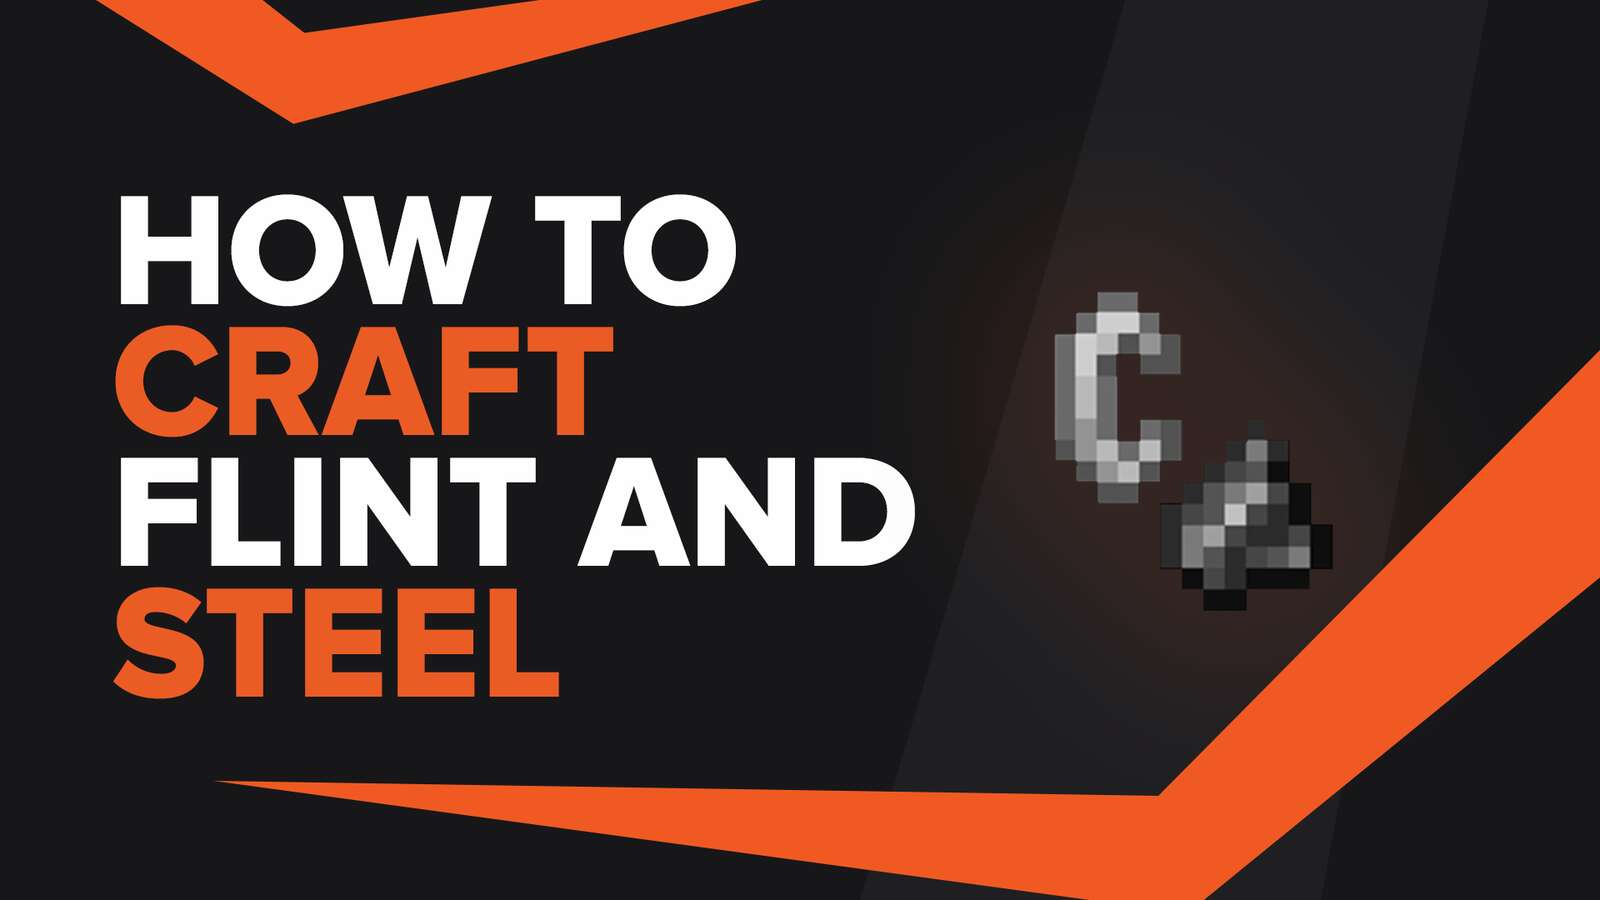 How To Make Flint And Steel In Minecraft